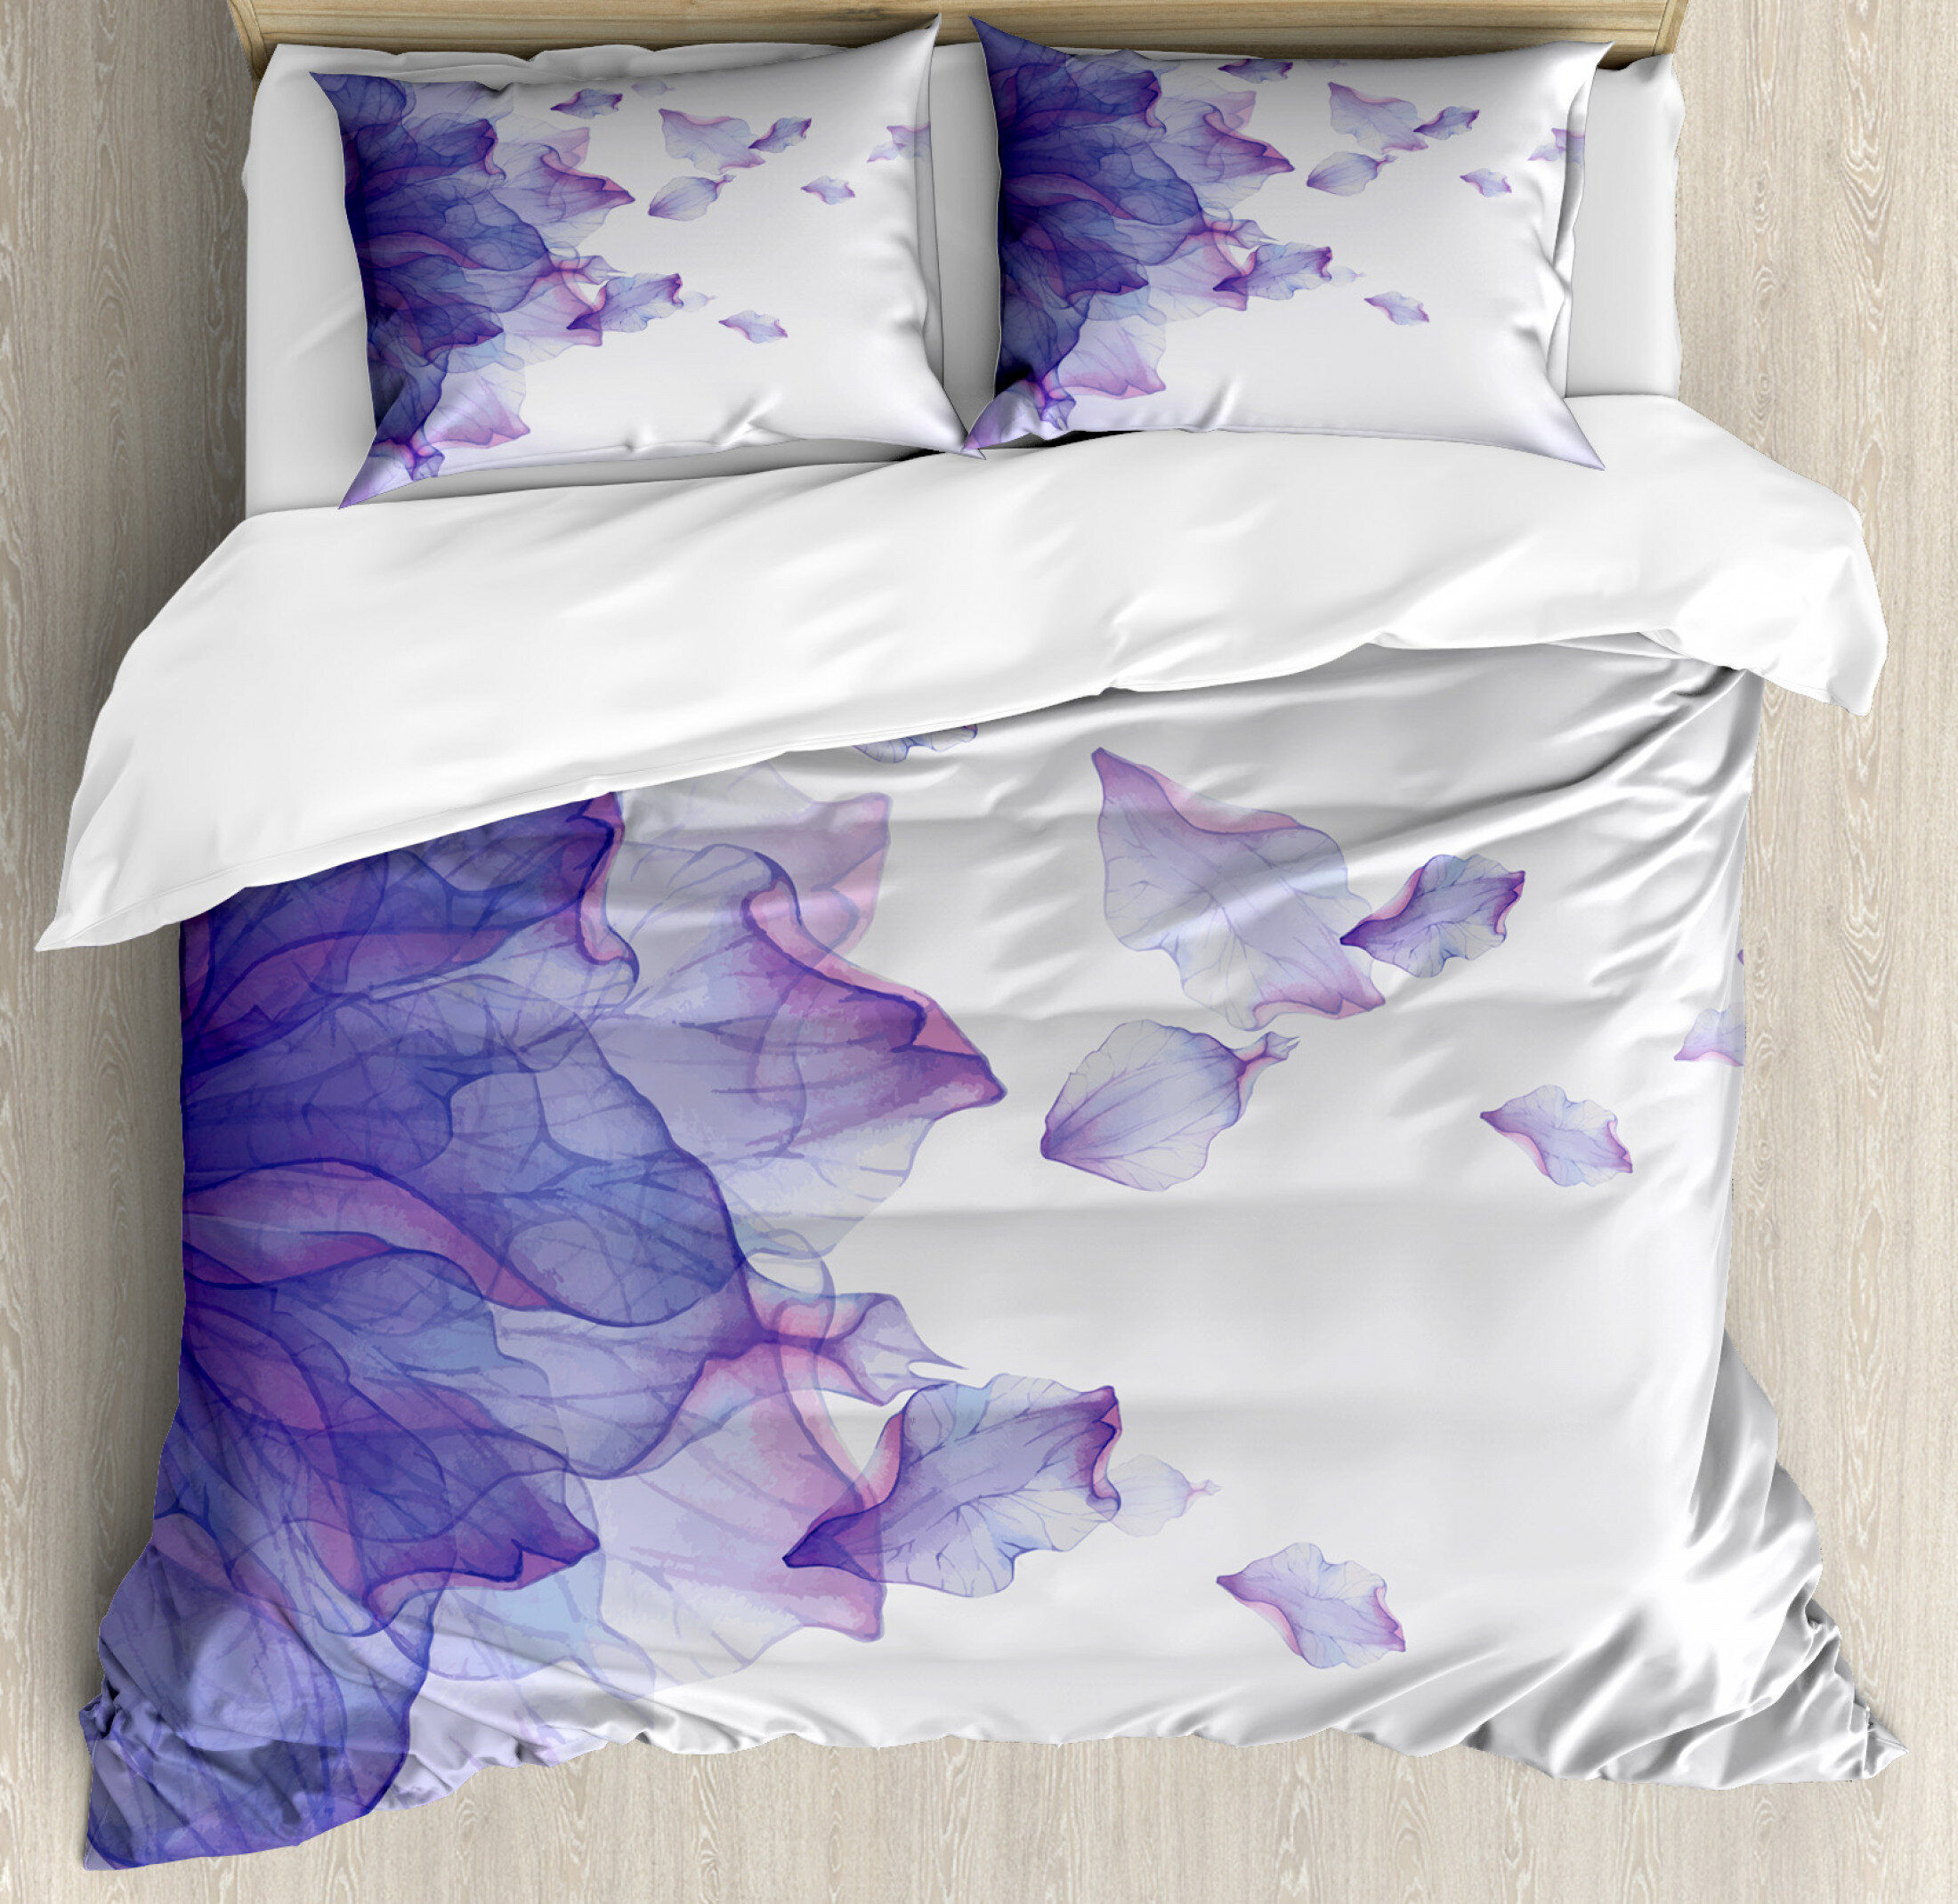 East Urban Home Ambesonne Flower Duvet Cover Set Abstract Themed